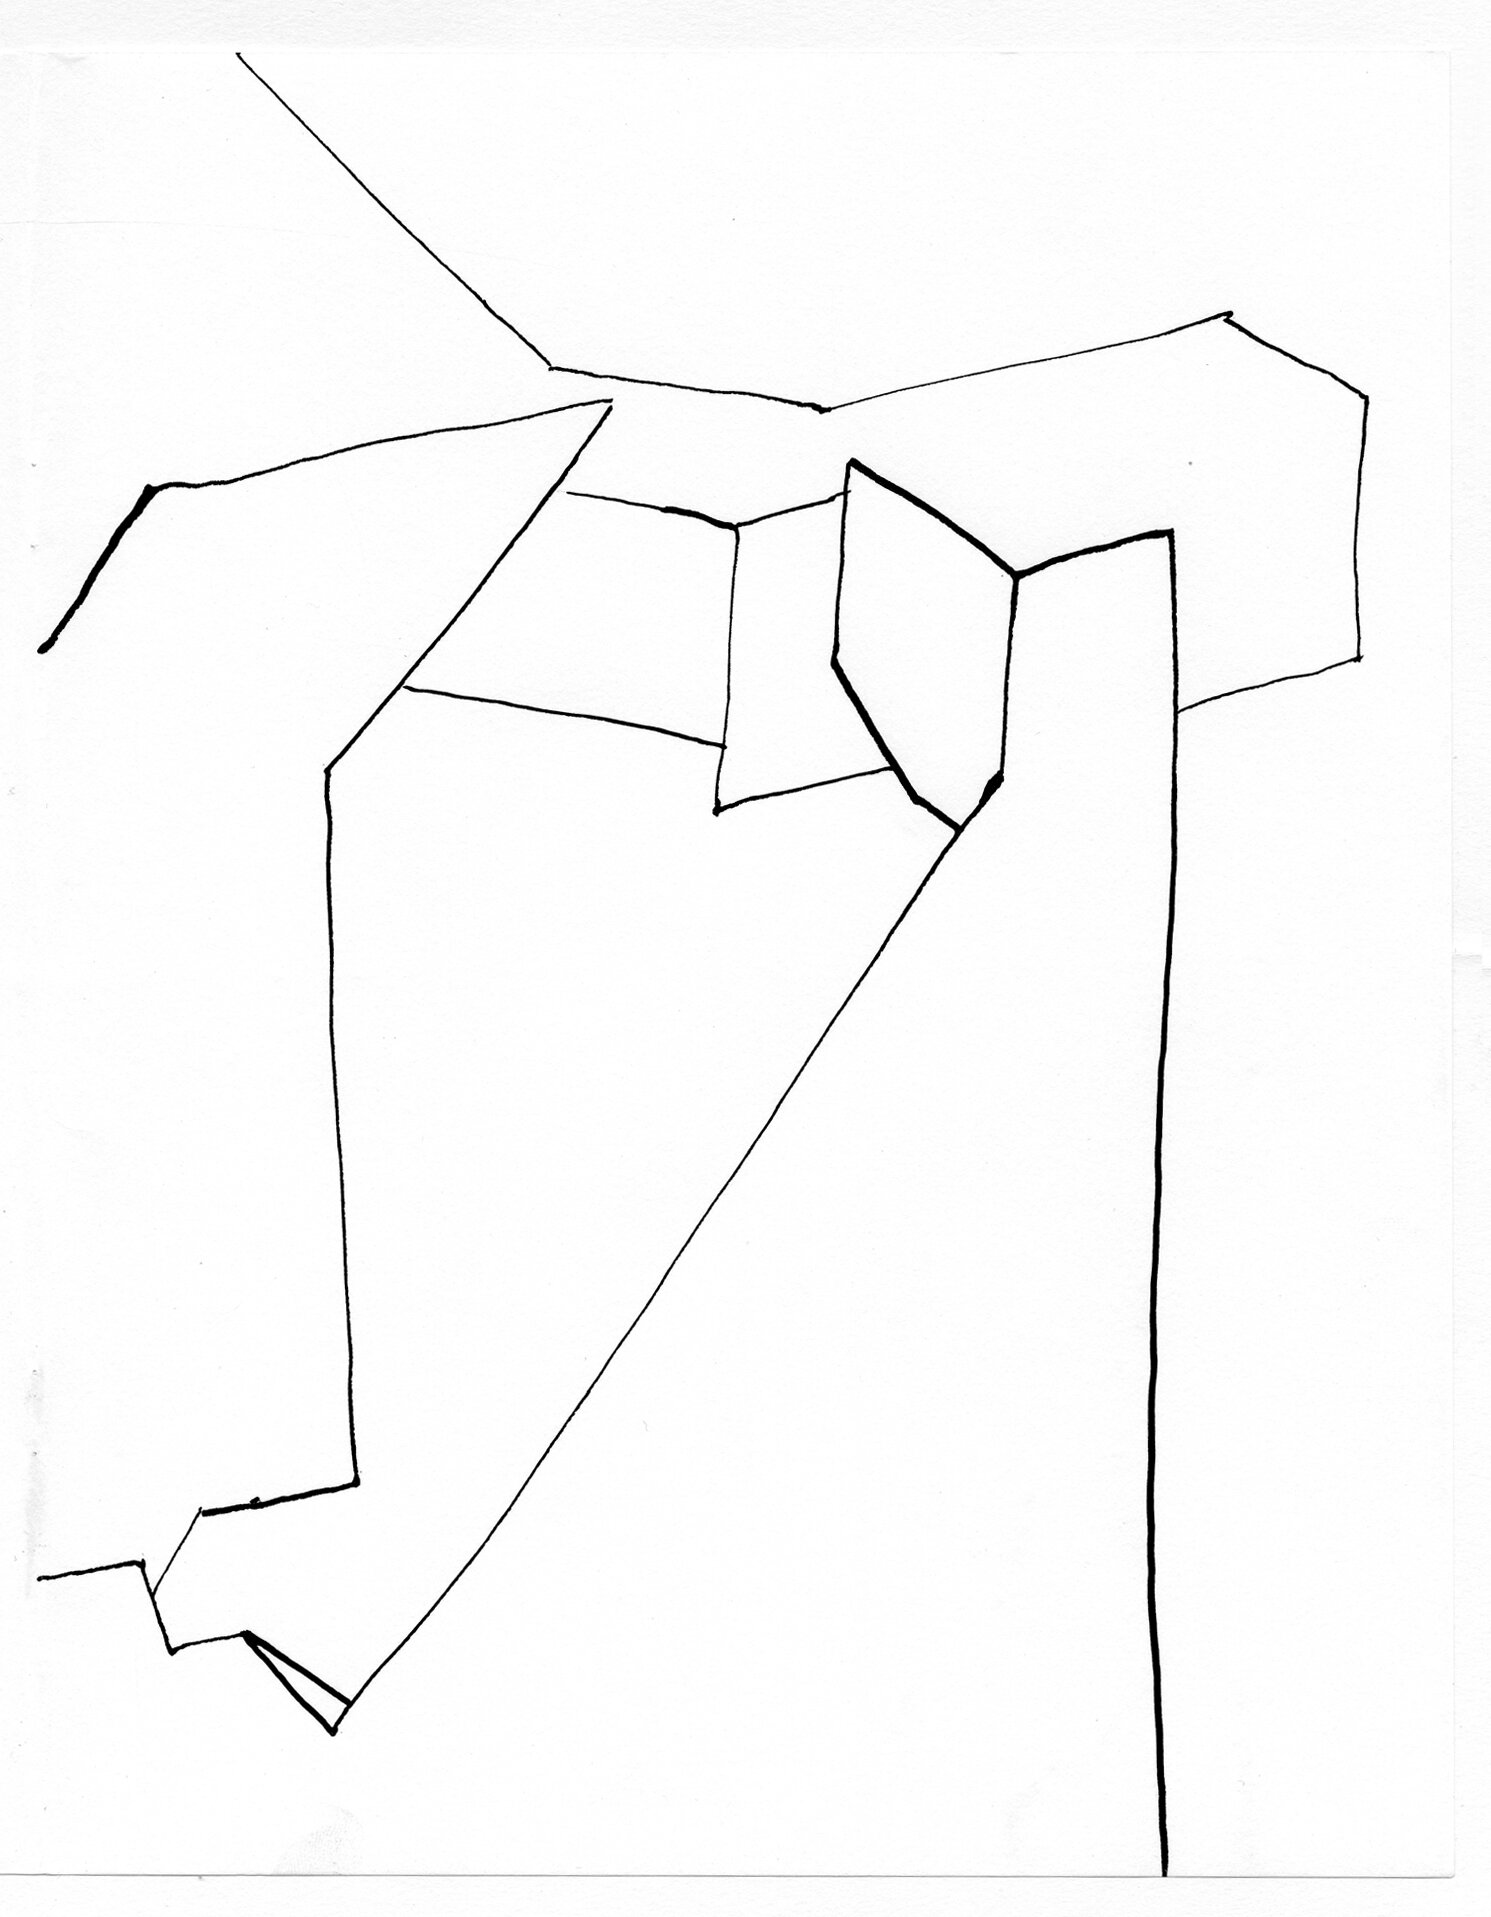   Dessins d’atelier/Studio Drawings , 2016, artist book accompanying the exhibition  Numa , Battat Contemporary, Montreal  Untitled daily drawings of sculptures in progress, ink on paper, 11 x 8½ in 